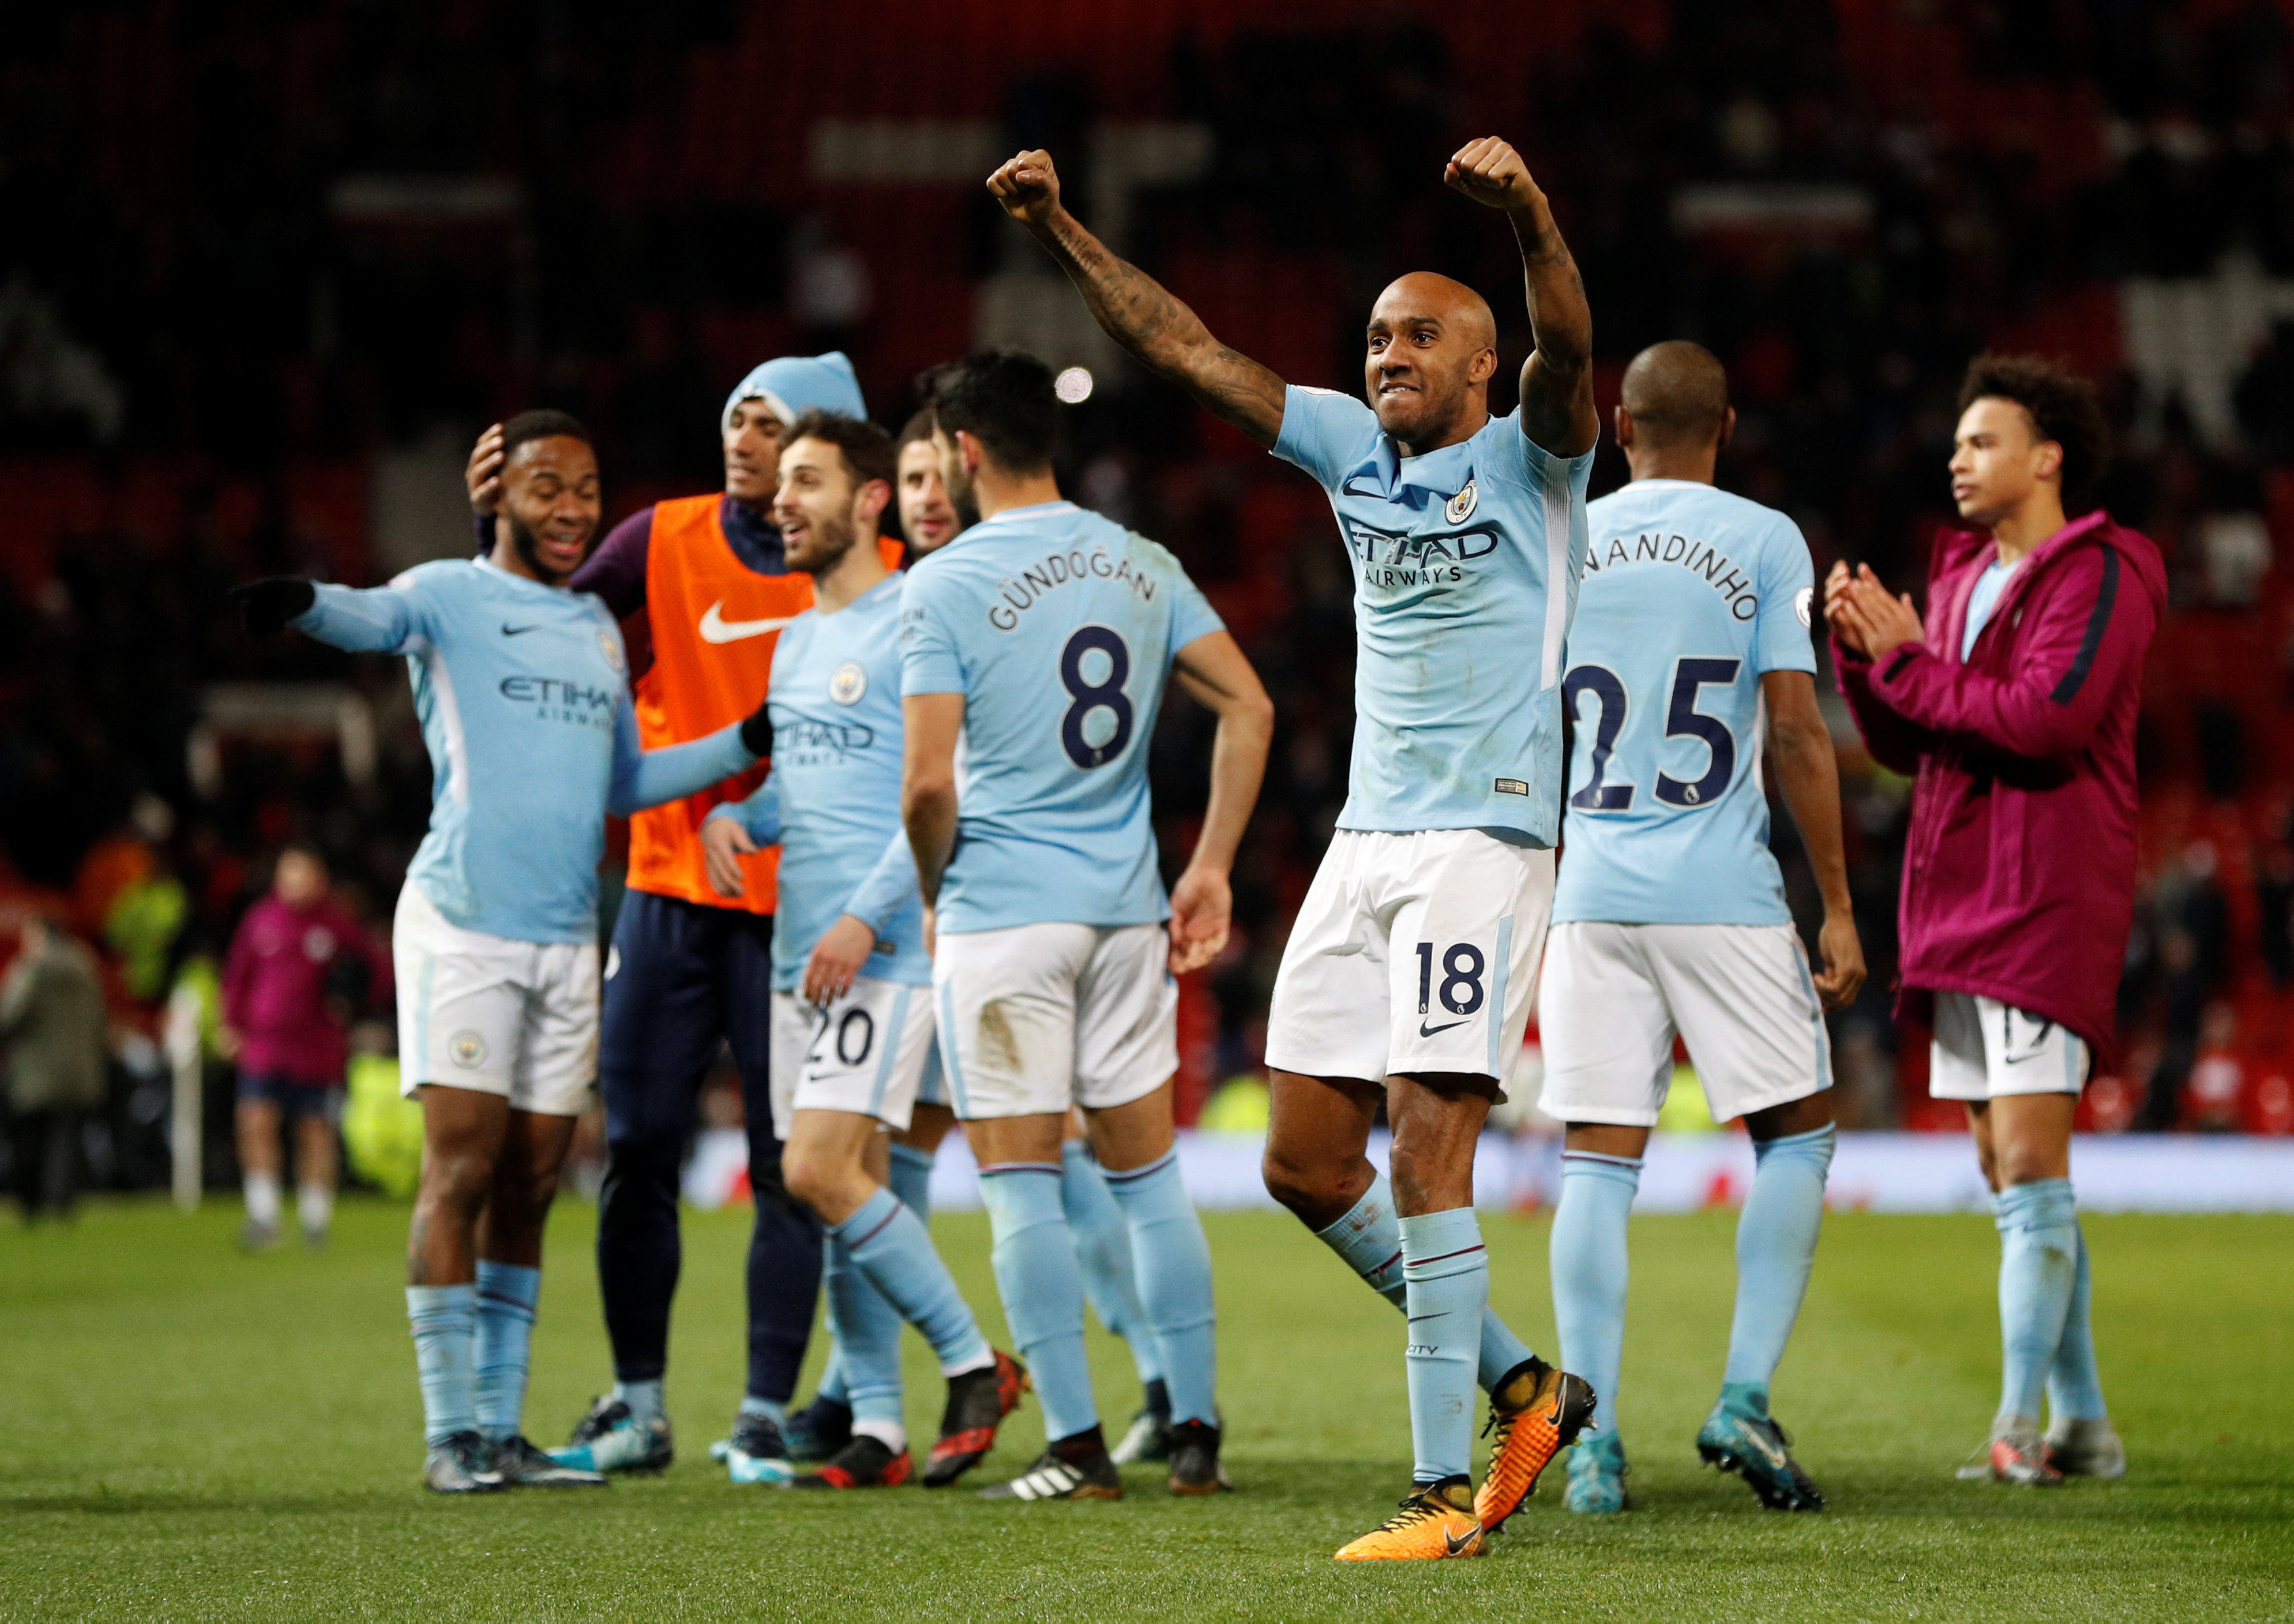 Football: City show there is more to their advantage than pure maths